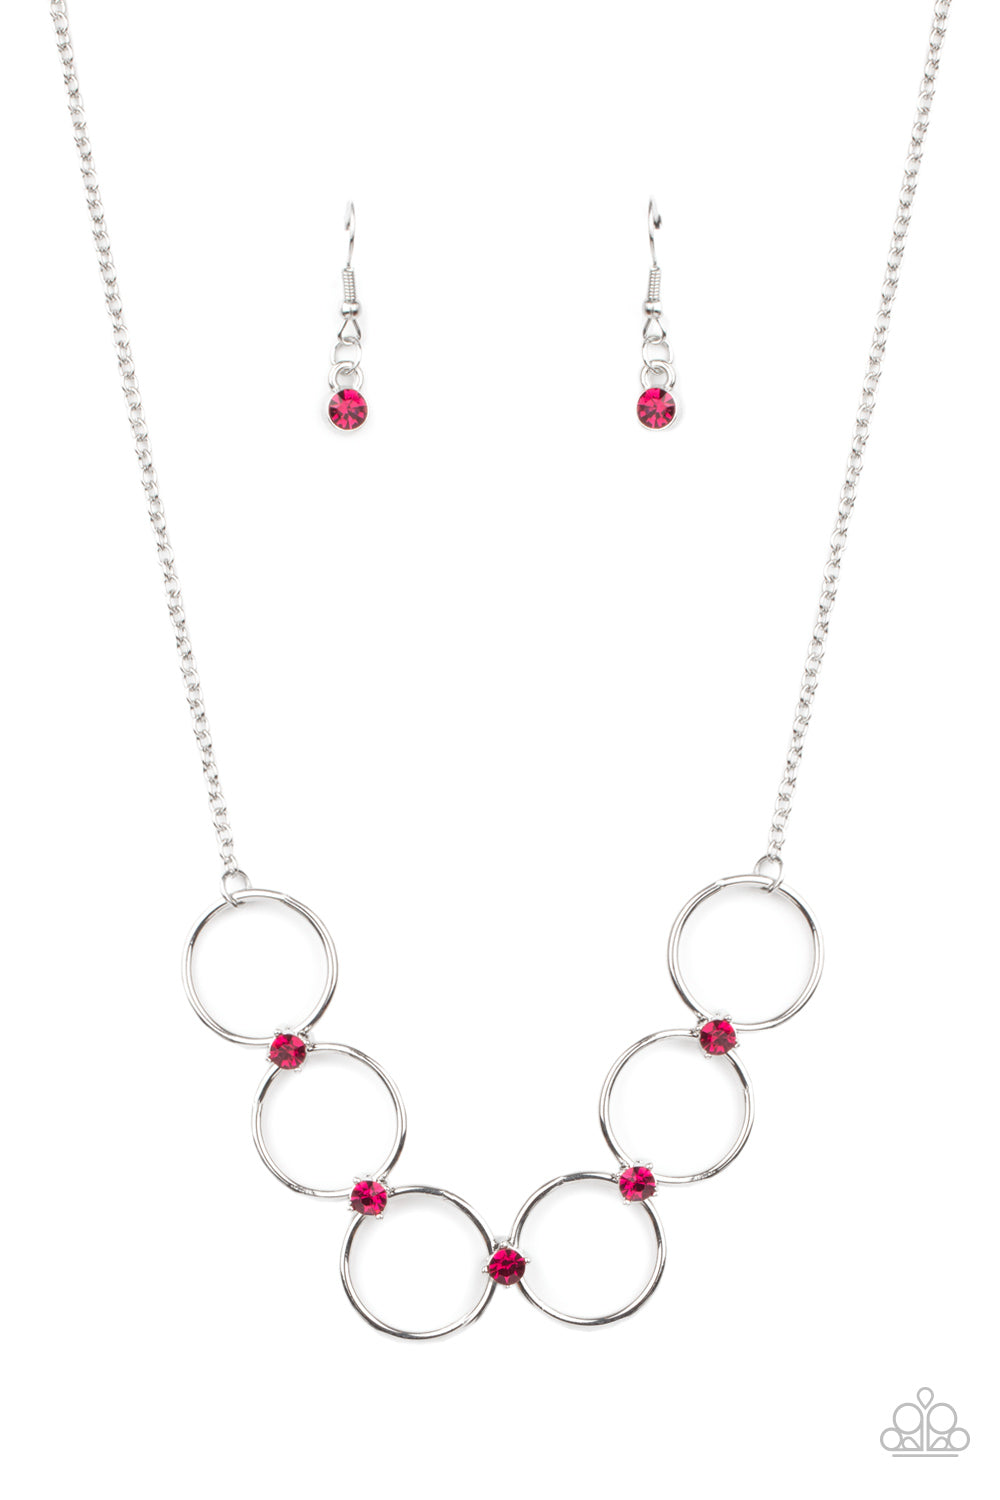 Regal Society - Pink necklace 2188